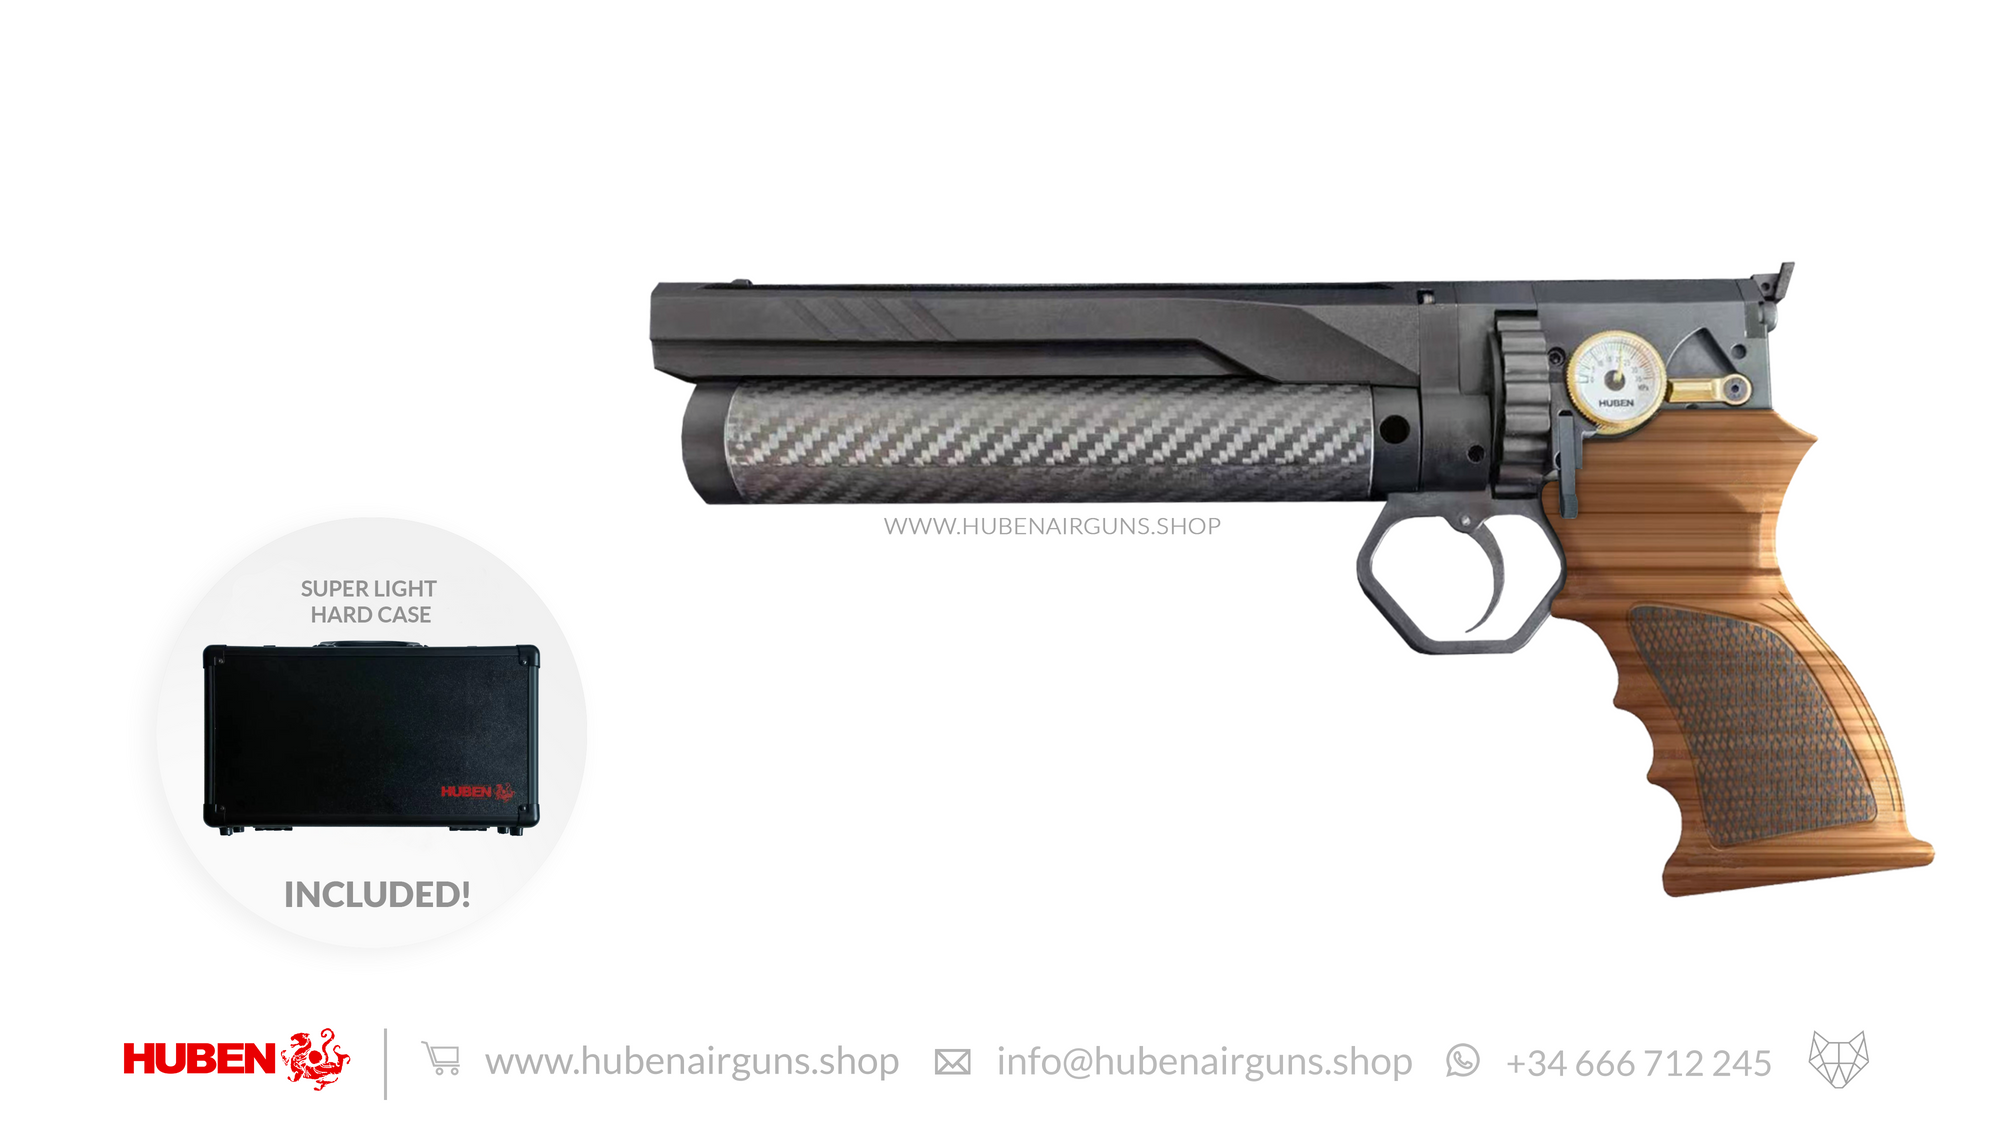 Huben Pistol GK1 black with walnut handle and black case with red logo included.